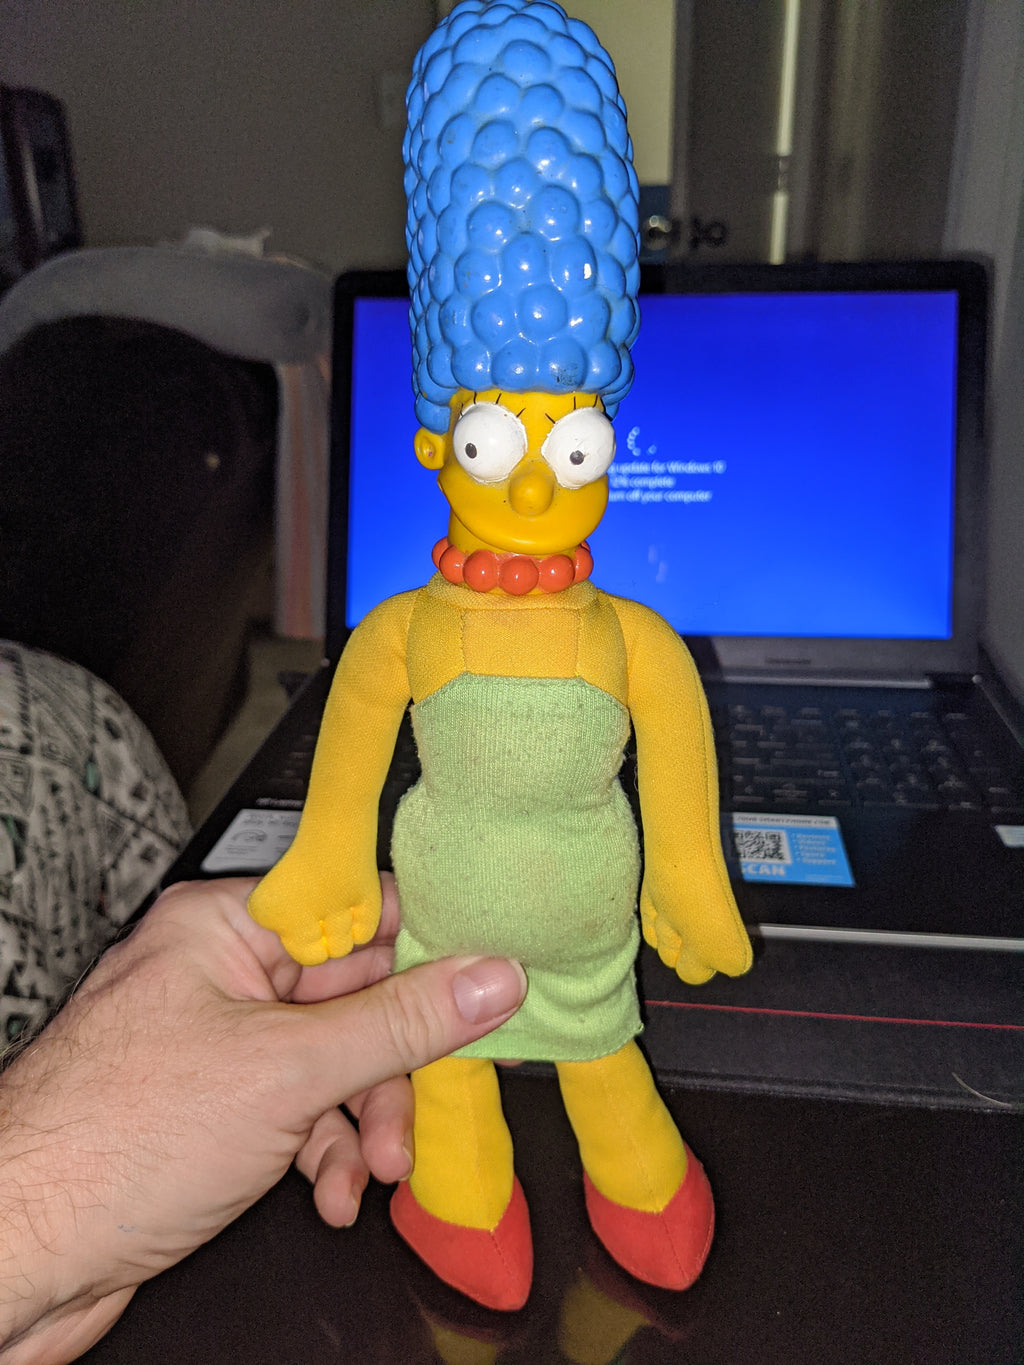 1990 Burger King 12" The Simpsons - Marge Simpson Plush / Hard Head Doll Fast Food Toy